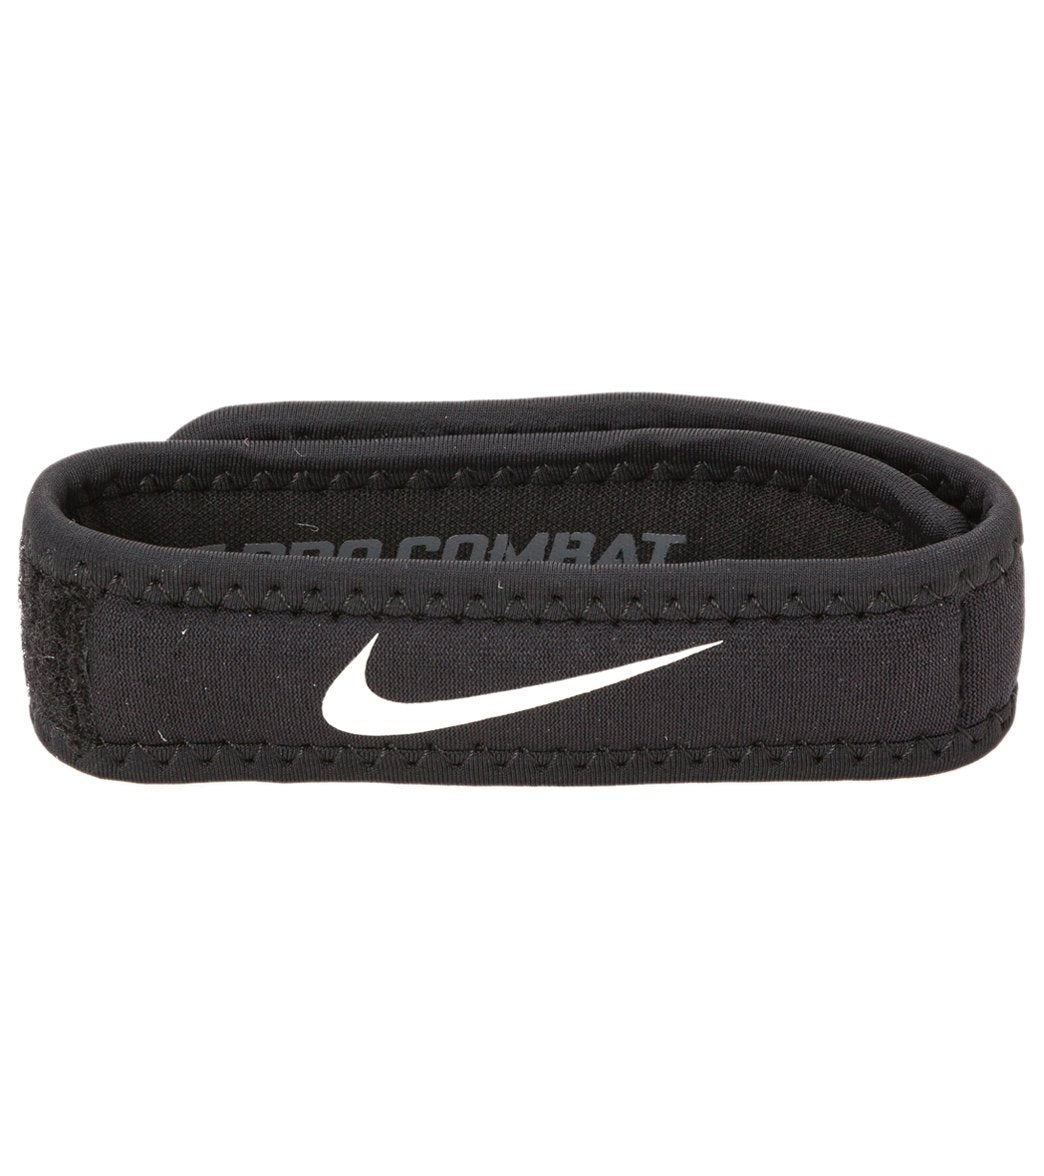 Nike Pro Band at SwimOutlet.com